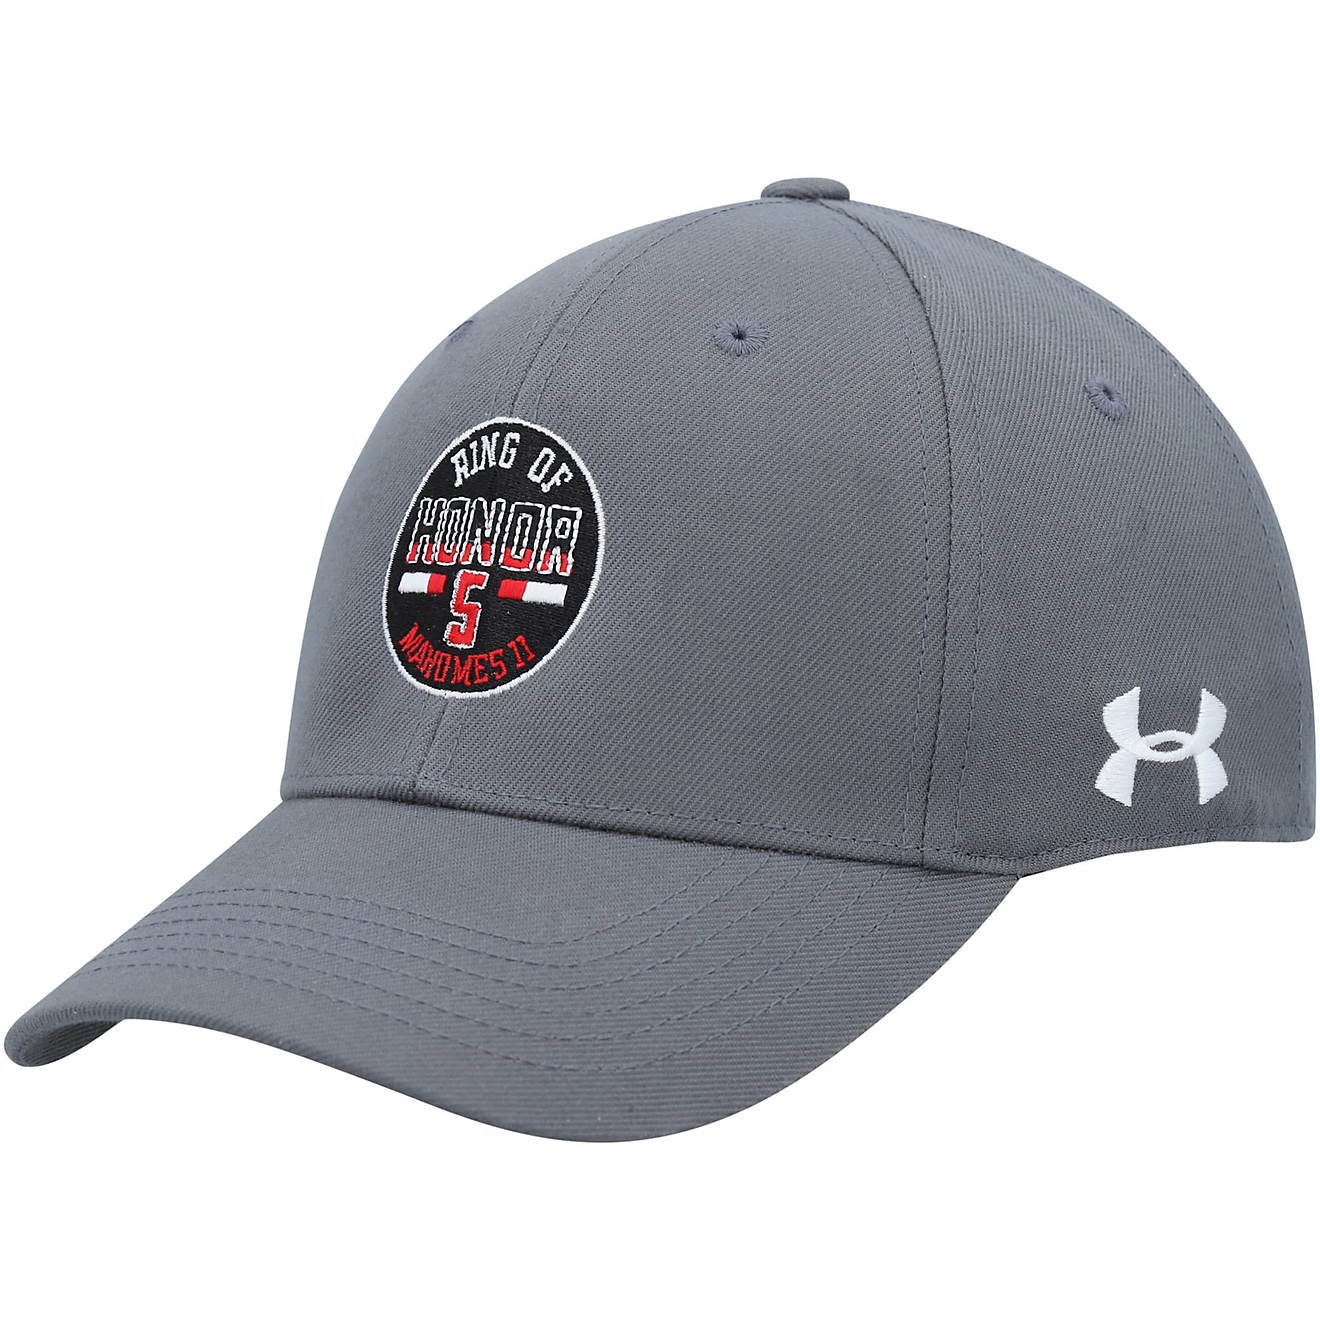 Under Armour Patrick Mahomes Texas Tech Raiders Ring of Honor Adjustable Hat                                                     - view number 1